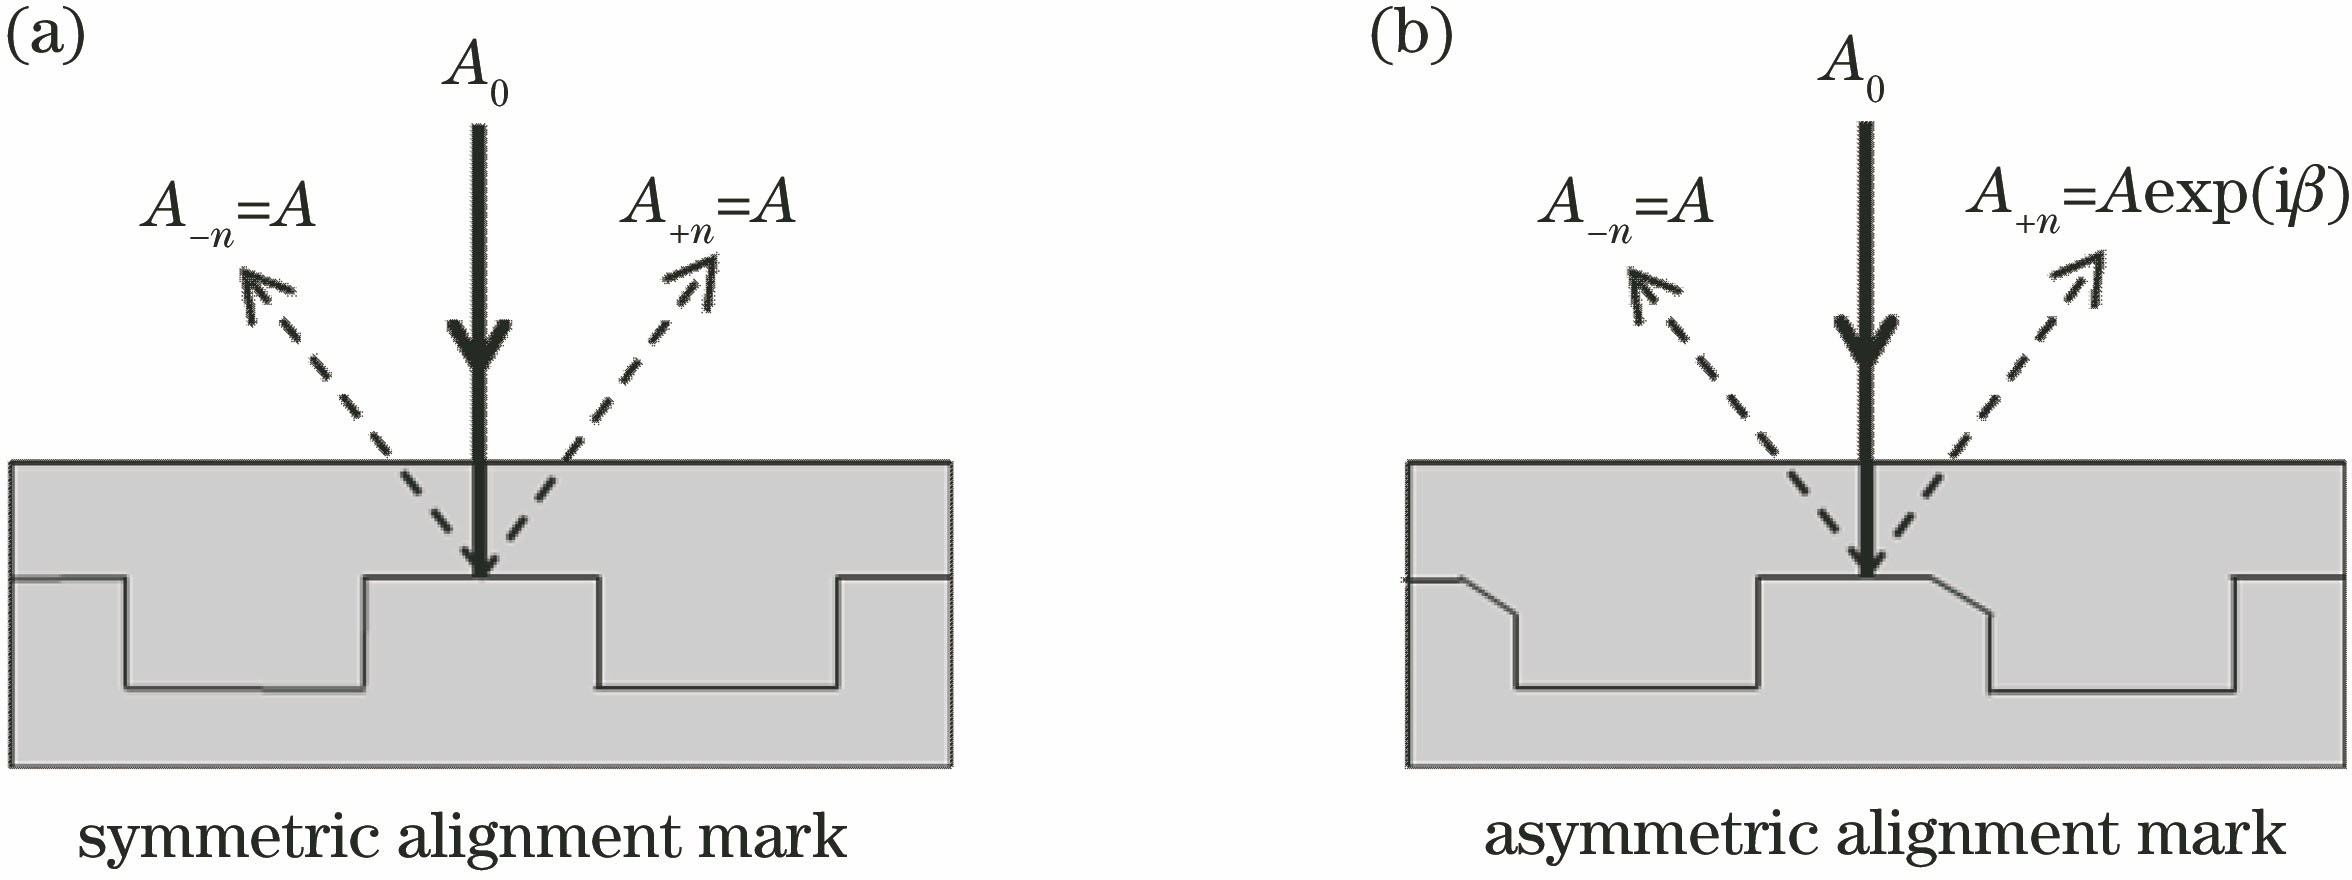 Beam diffraction diagrams of different alignment marks. (a) Symmetric alignment mark; (b) asymmetric alignment mark